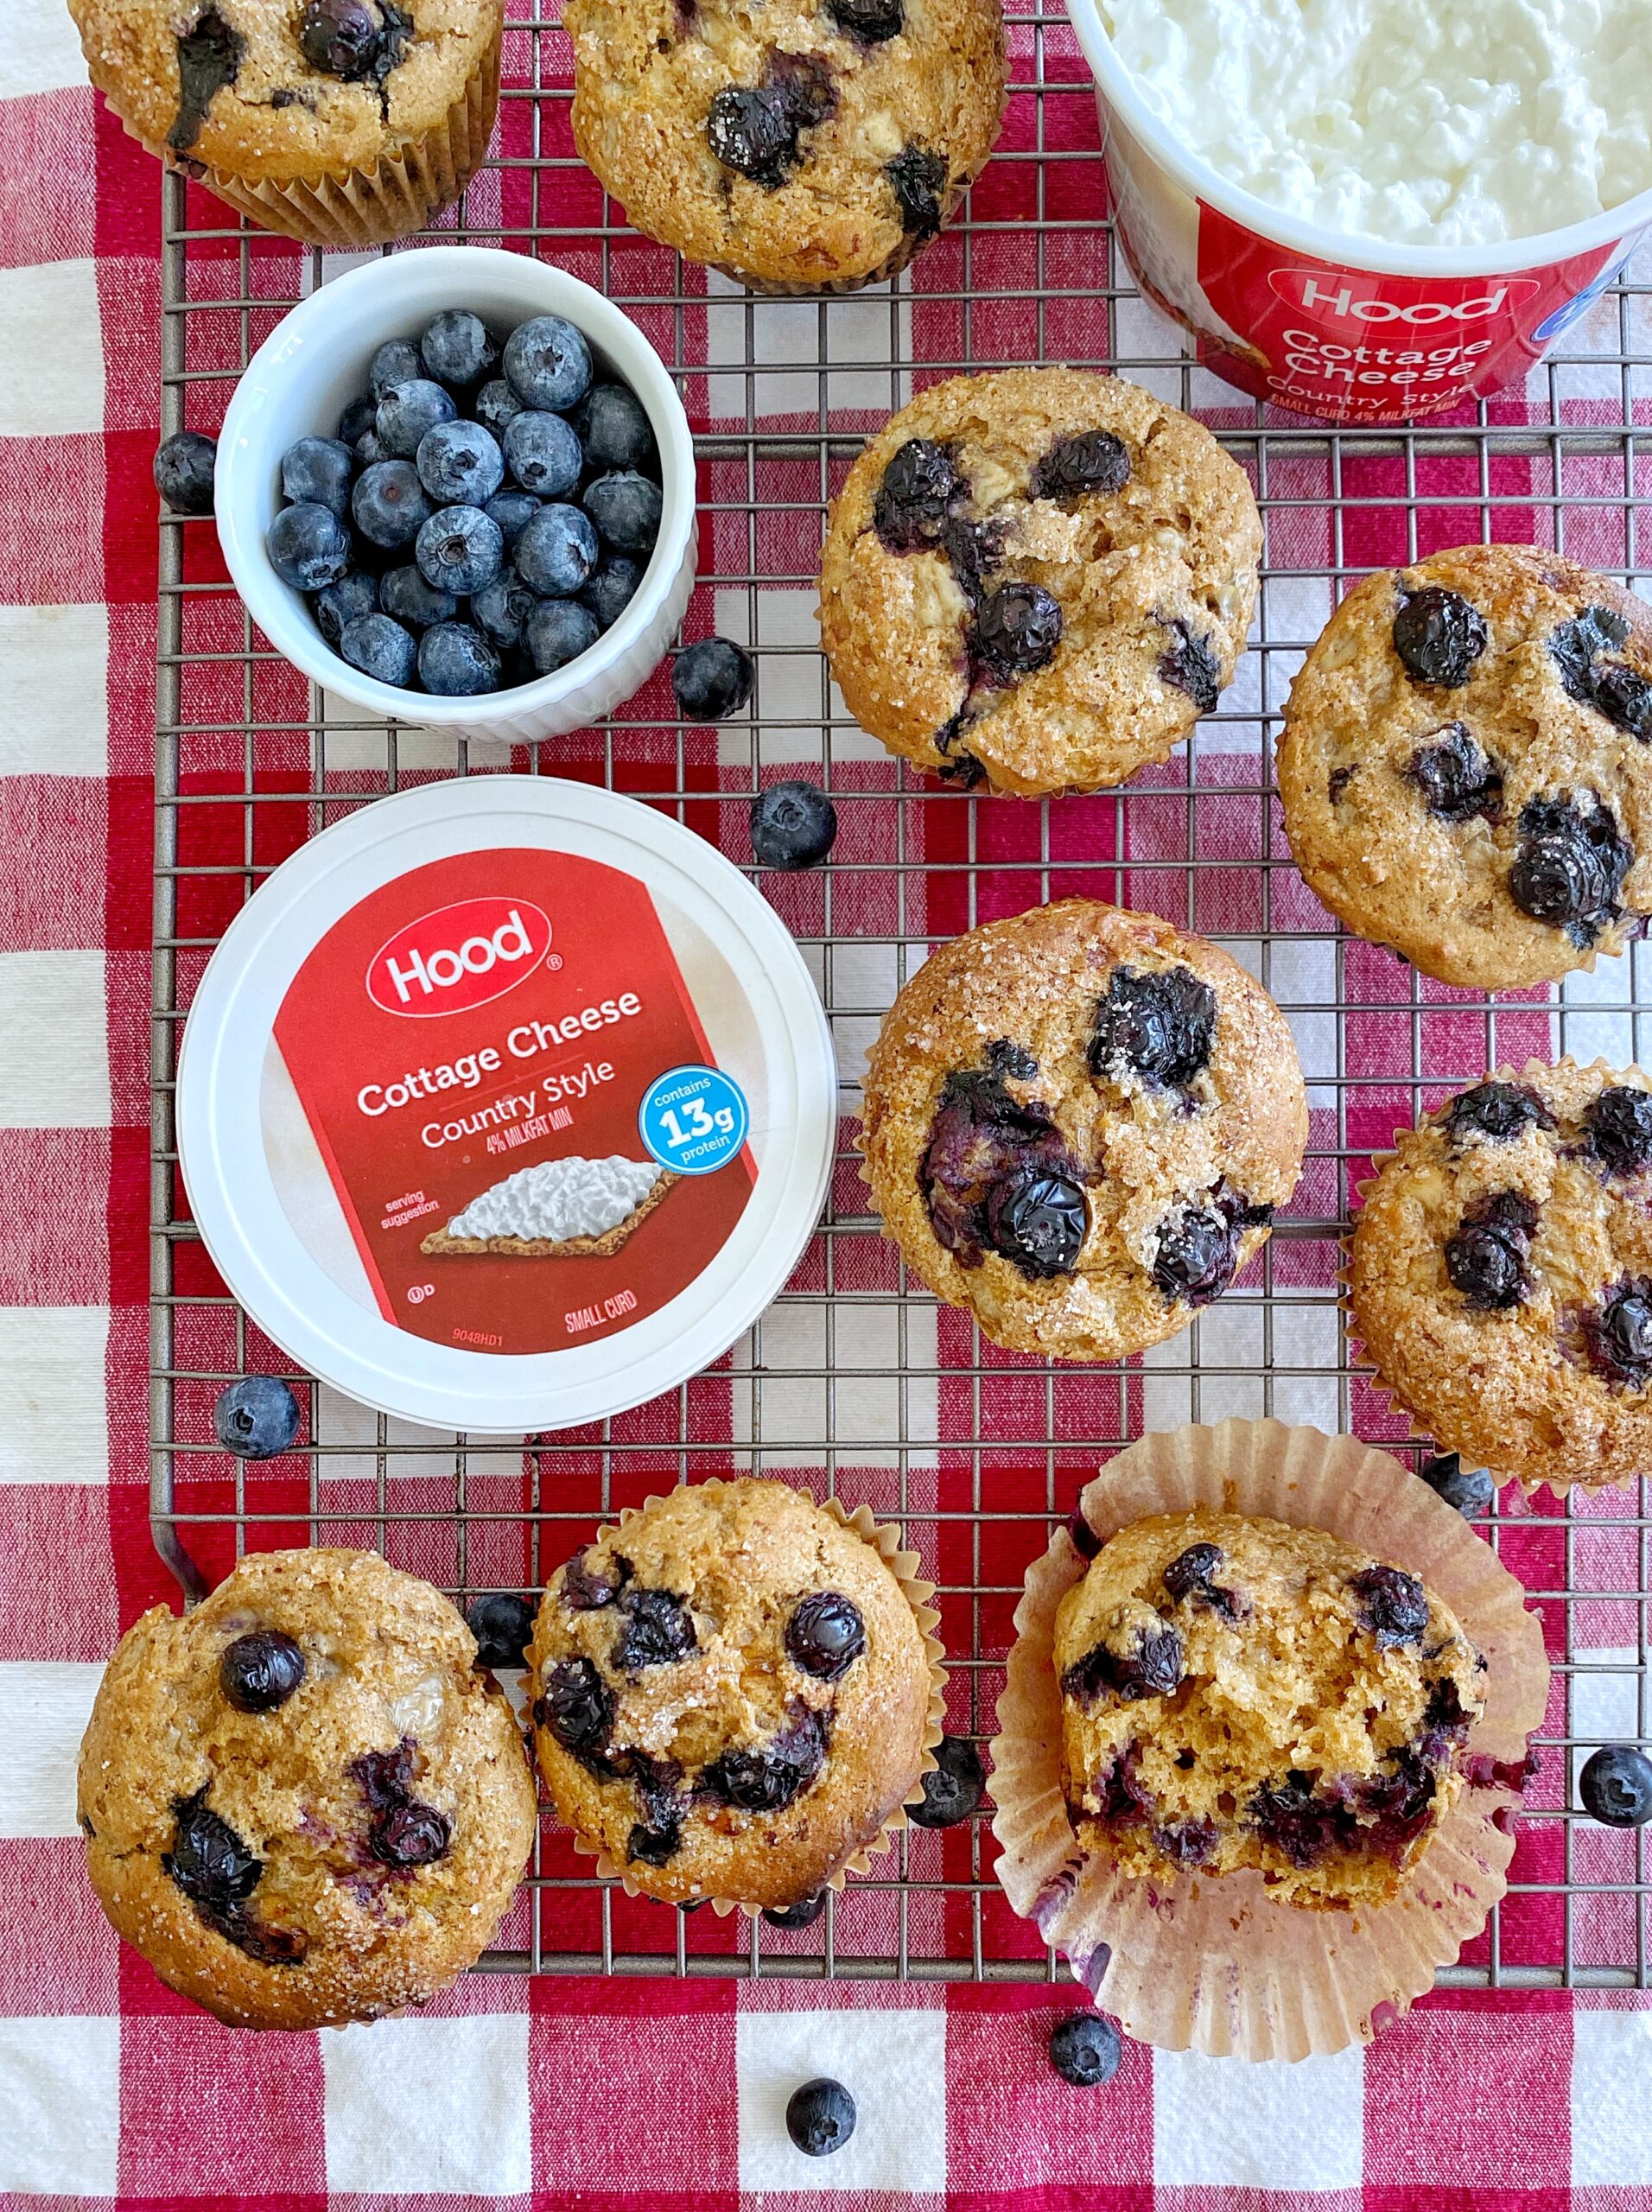 Blueberry muffins in paper liners on a wire rack sitting atop a red and white checkered tablecloth. A ramekin of blueberries and an open container of cottage cheese are mixed in with the muffins.